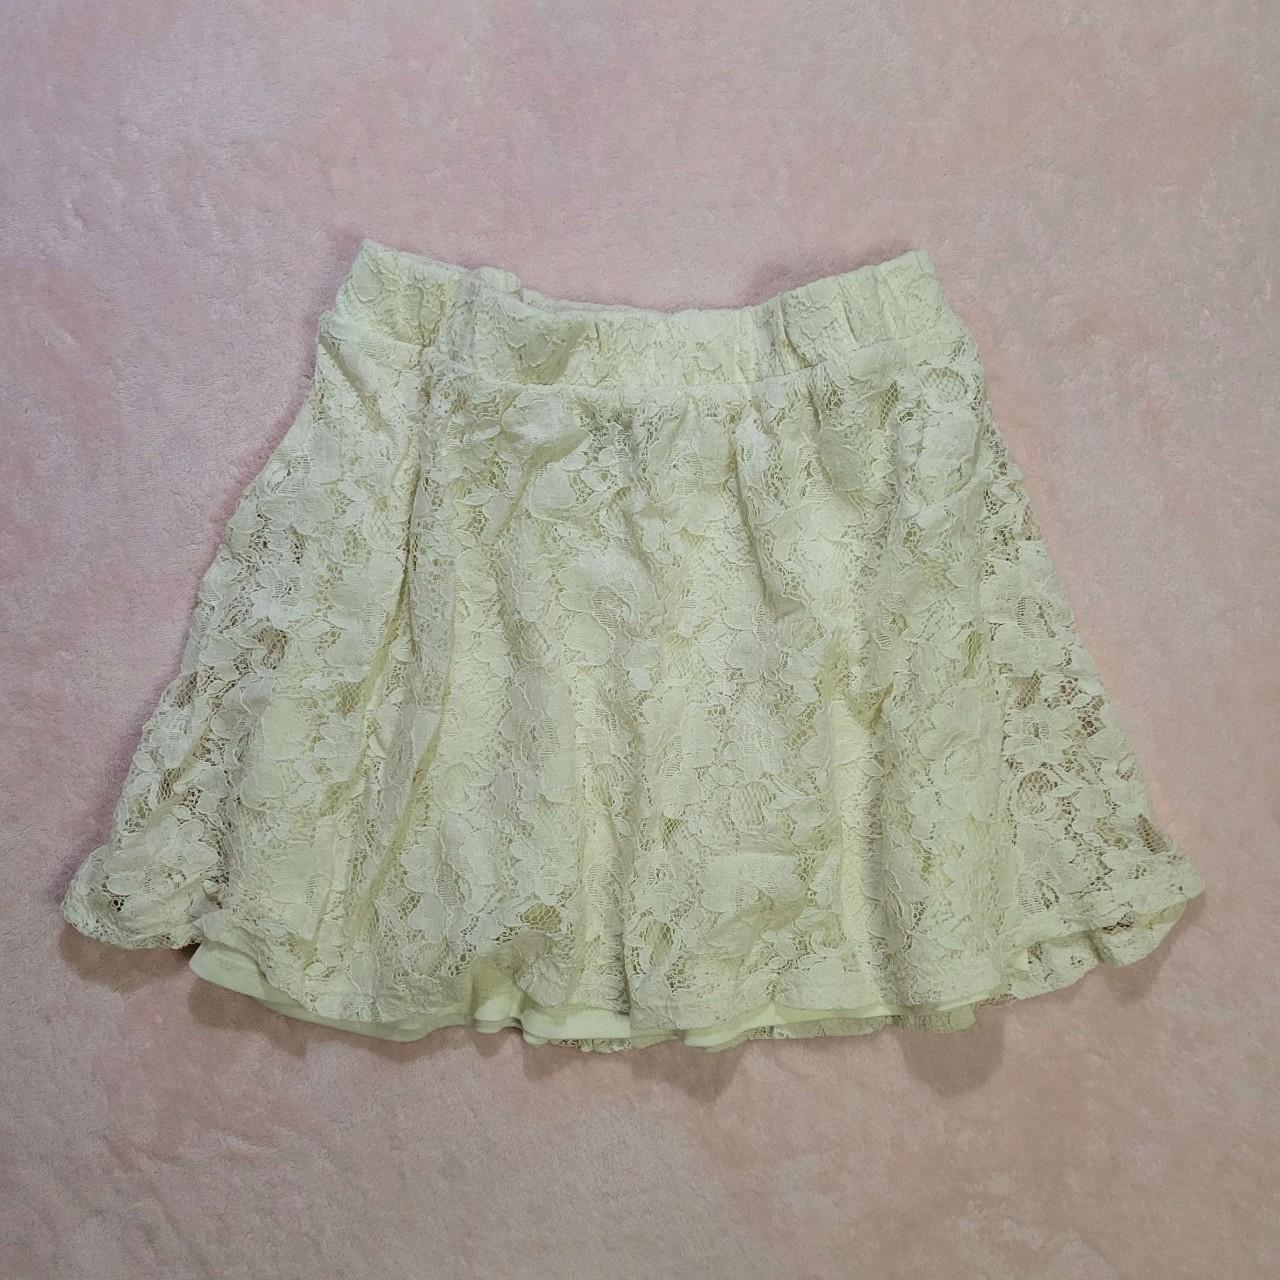 Lace Skirt  Forever 21